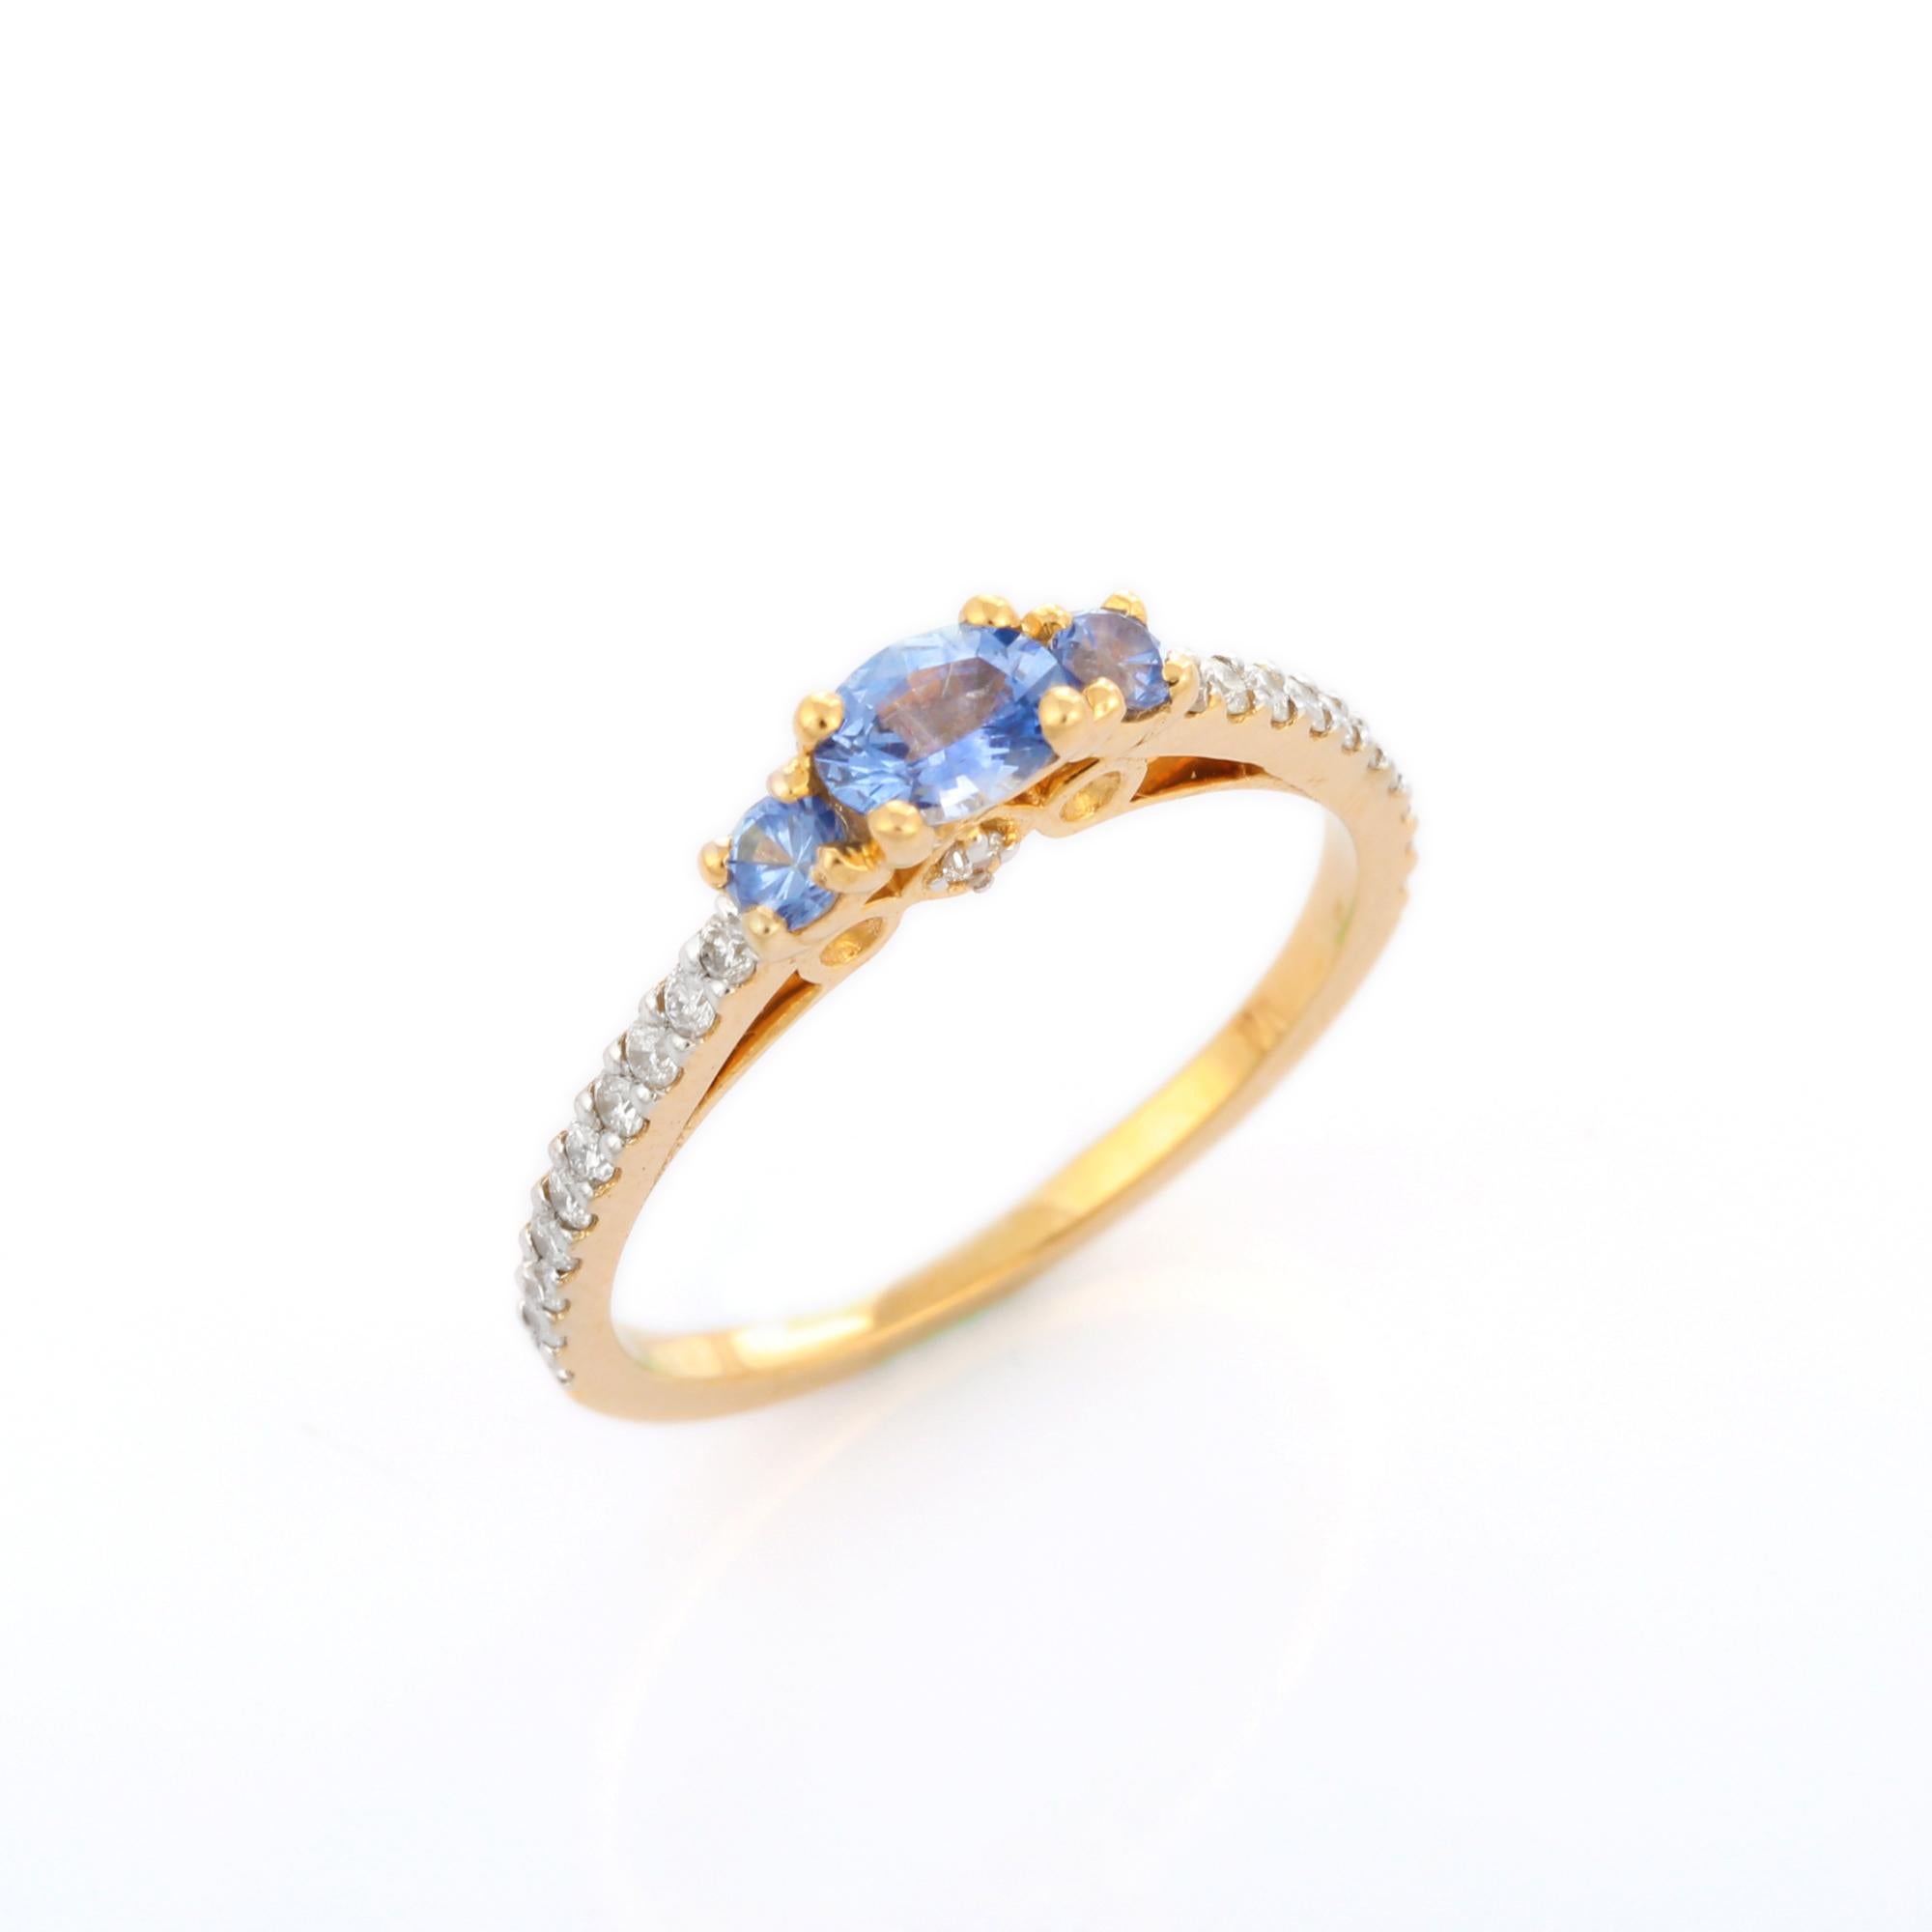 For Sale:  Minimalist Three Stone Blue Sapphire and Diamond Ring in 14K Solid Yellow Gold 7